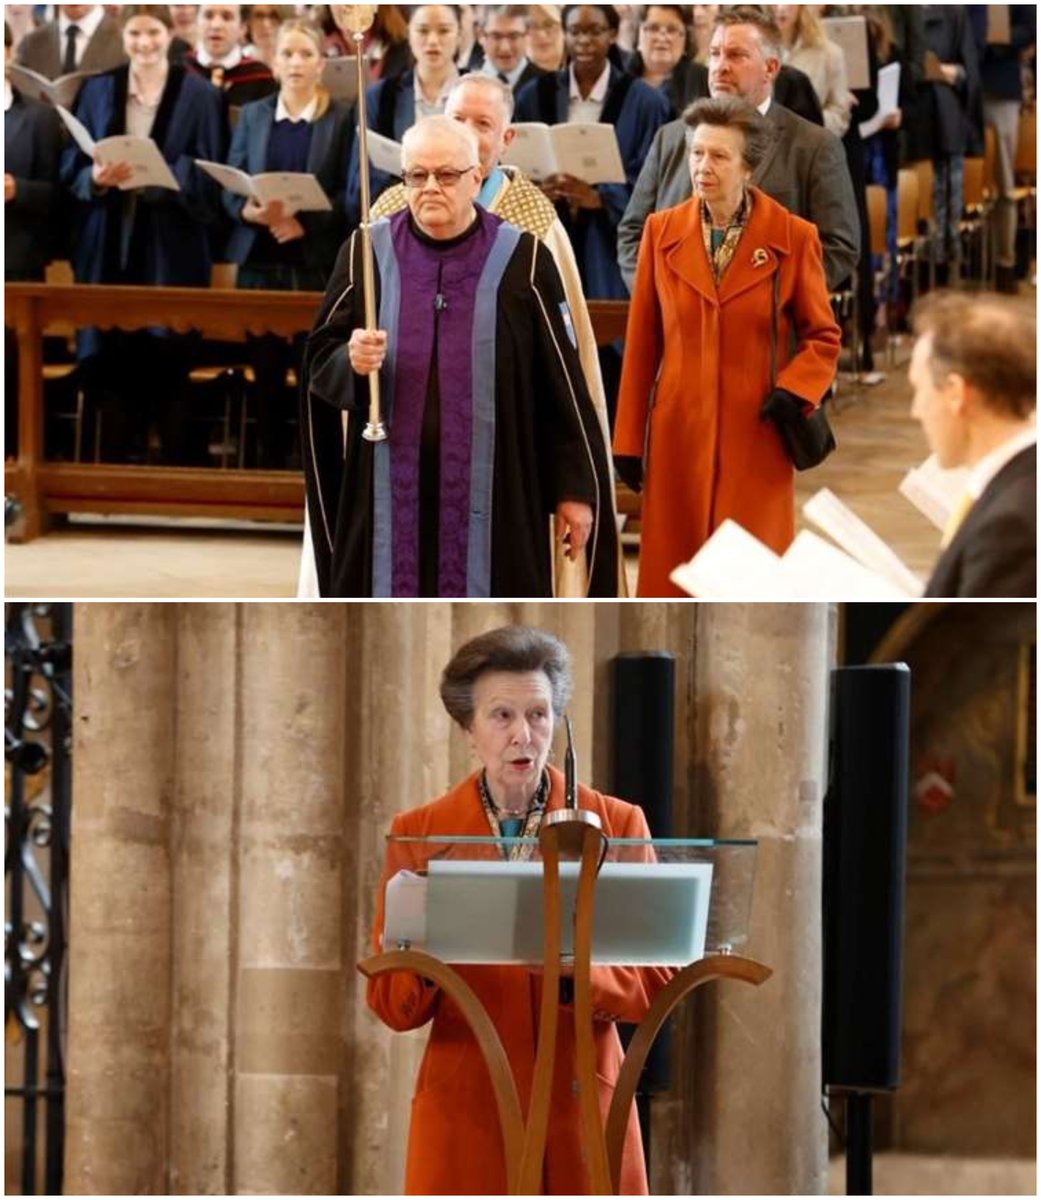 The Princess Royal attended a centenary service at Canterbury Cathedral for the Benenden school, which she attended in the 1960s.

The ceremony was marked by Princess Anne’s participation in the procession and the reading she gave during the service.

kentonline.co.uk/ashford/news/r…